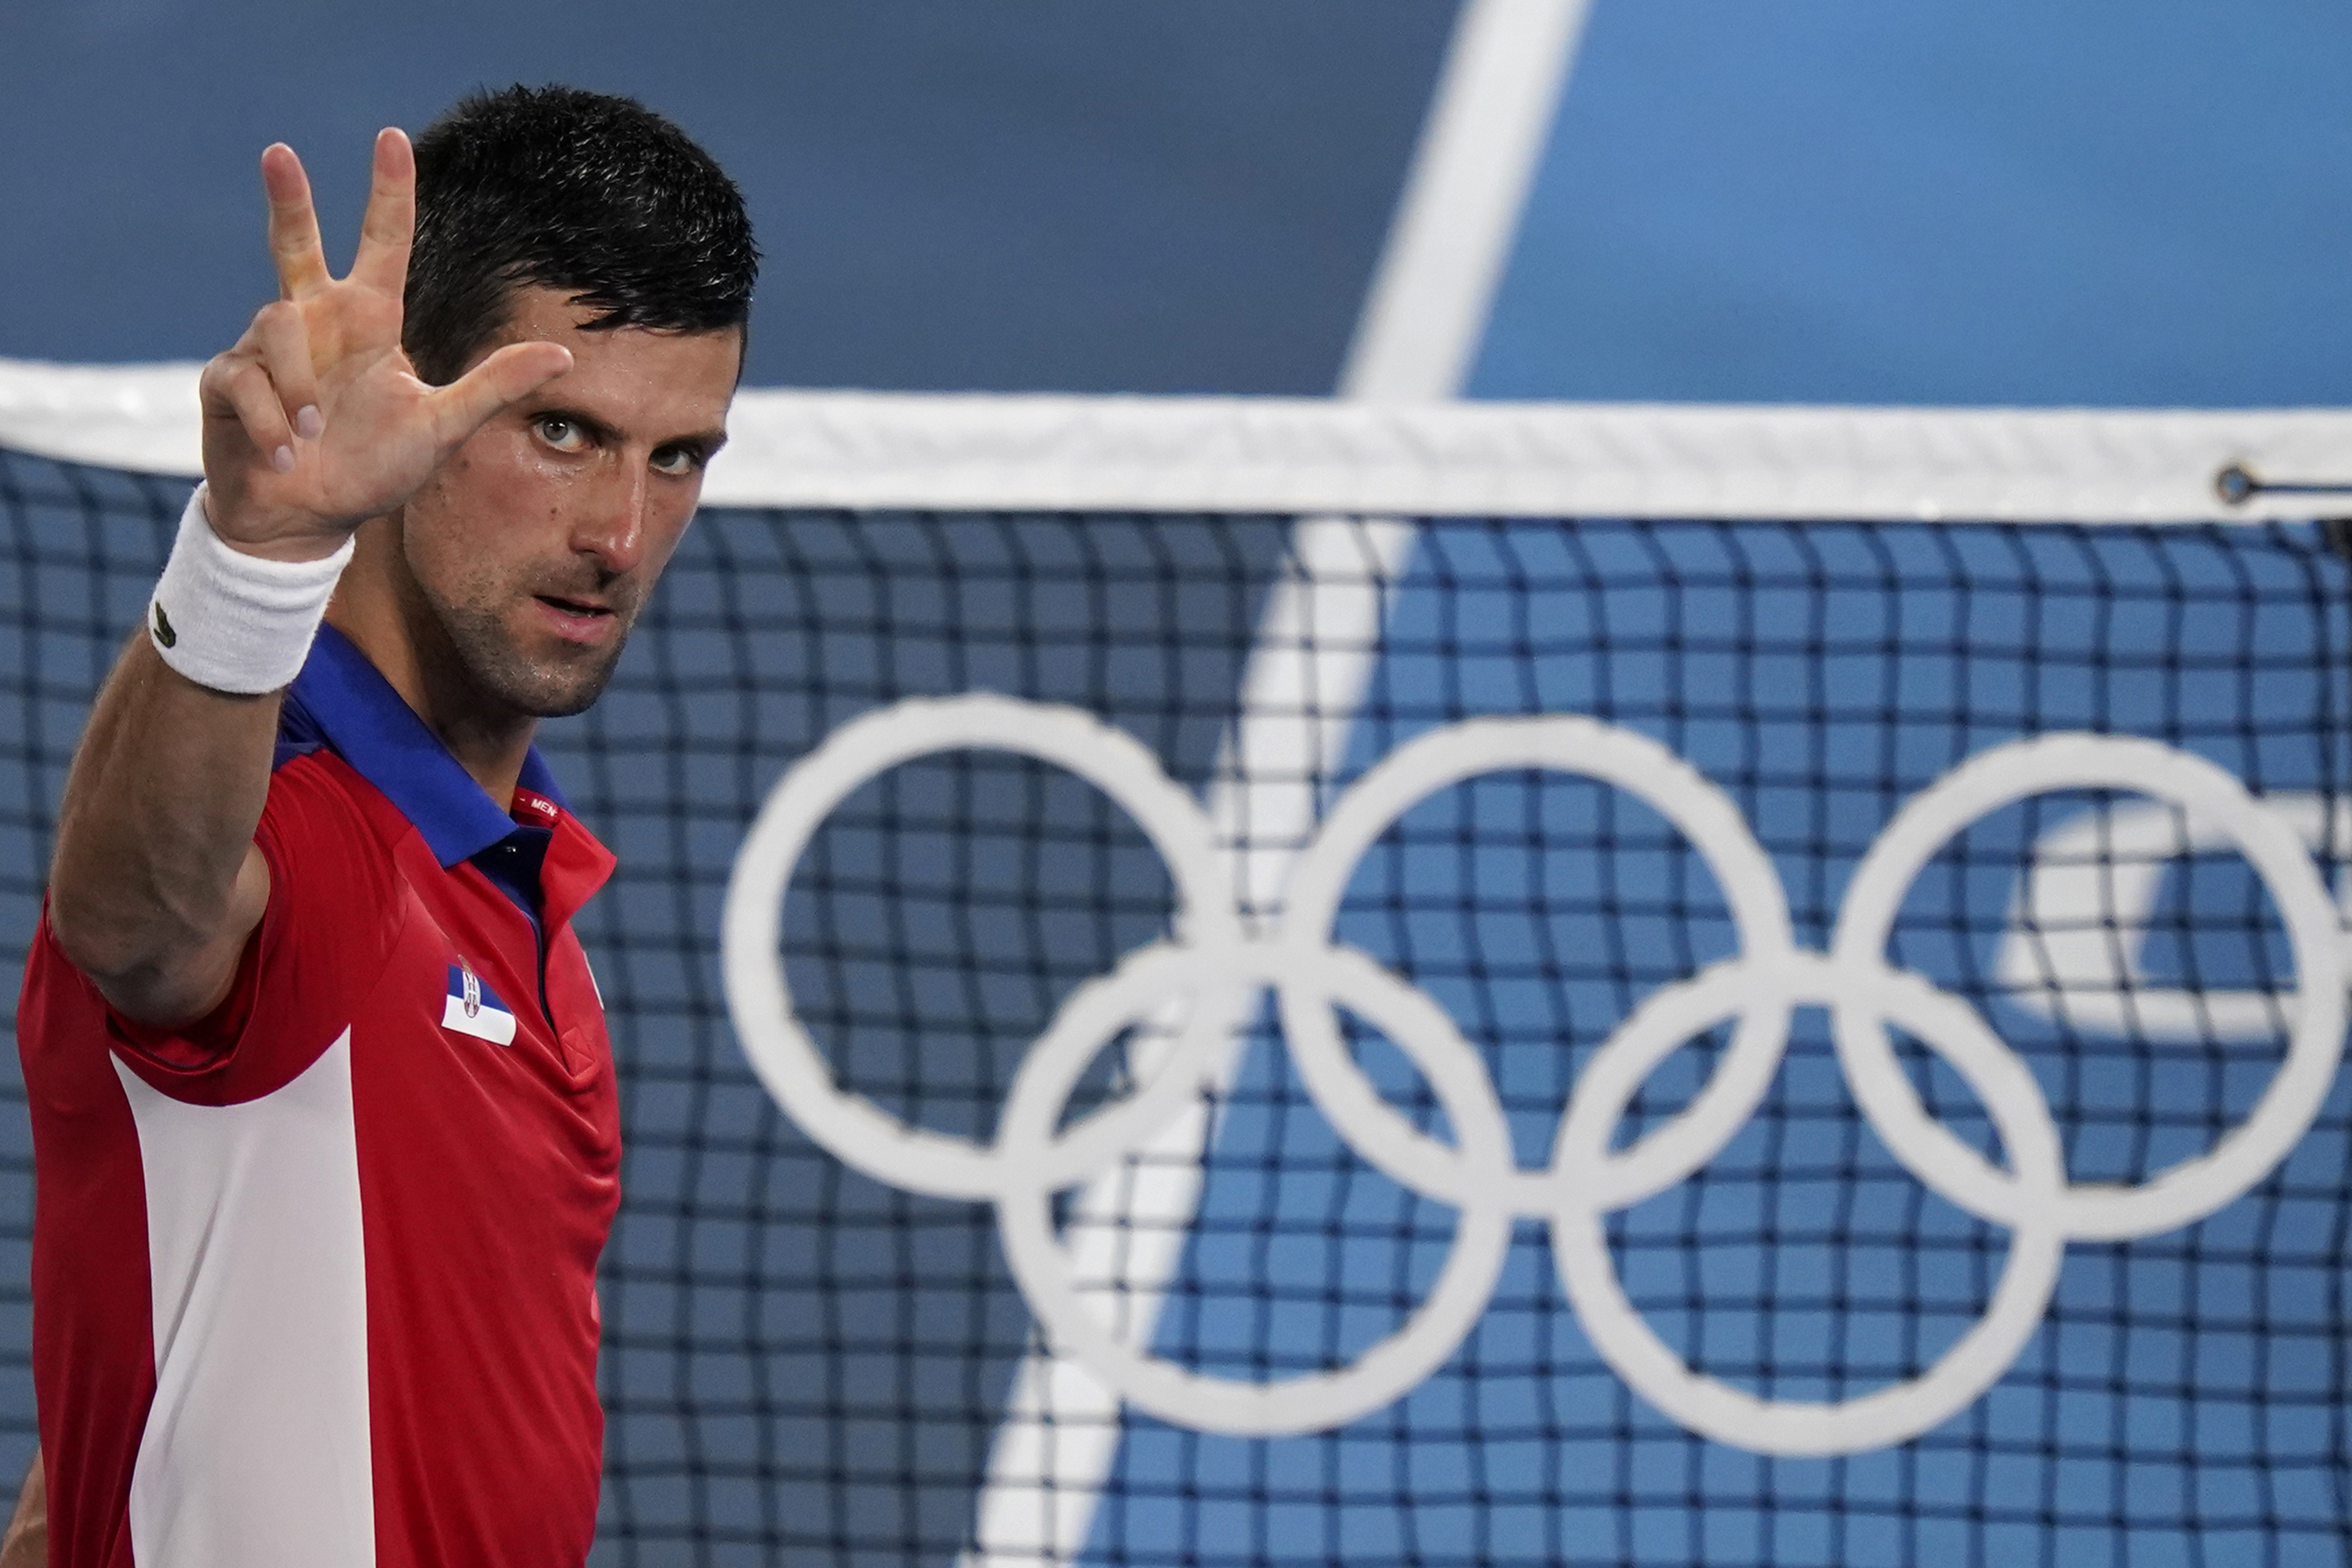 Novak Djokovic, of Serbia, celebrates after defeating Kei Nishikori, of Japan, during the quarterfinals of the tennis competition at the Tokyo Olympics.